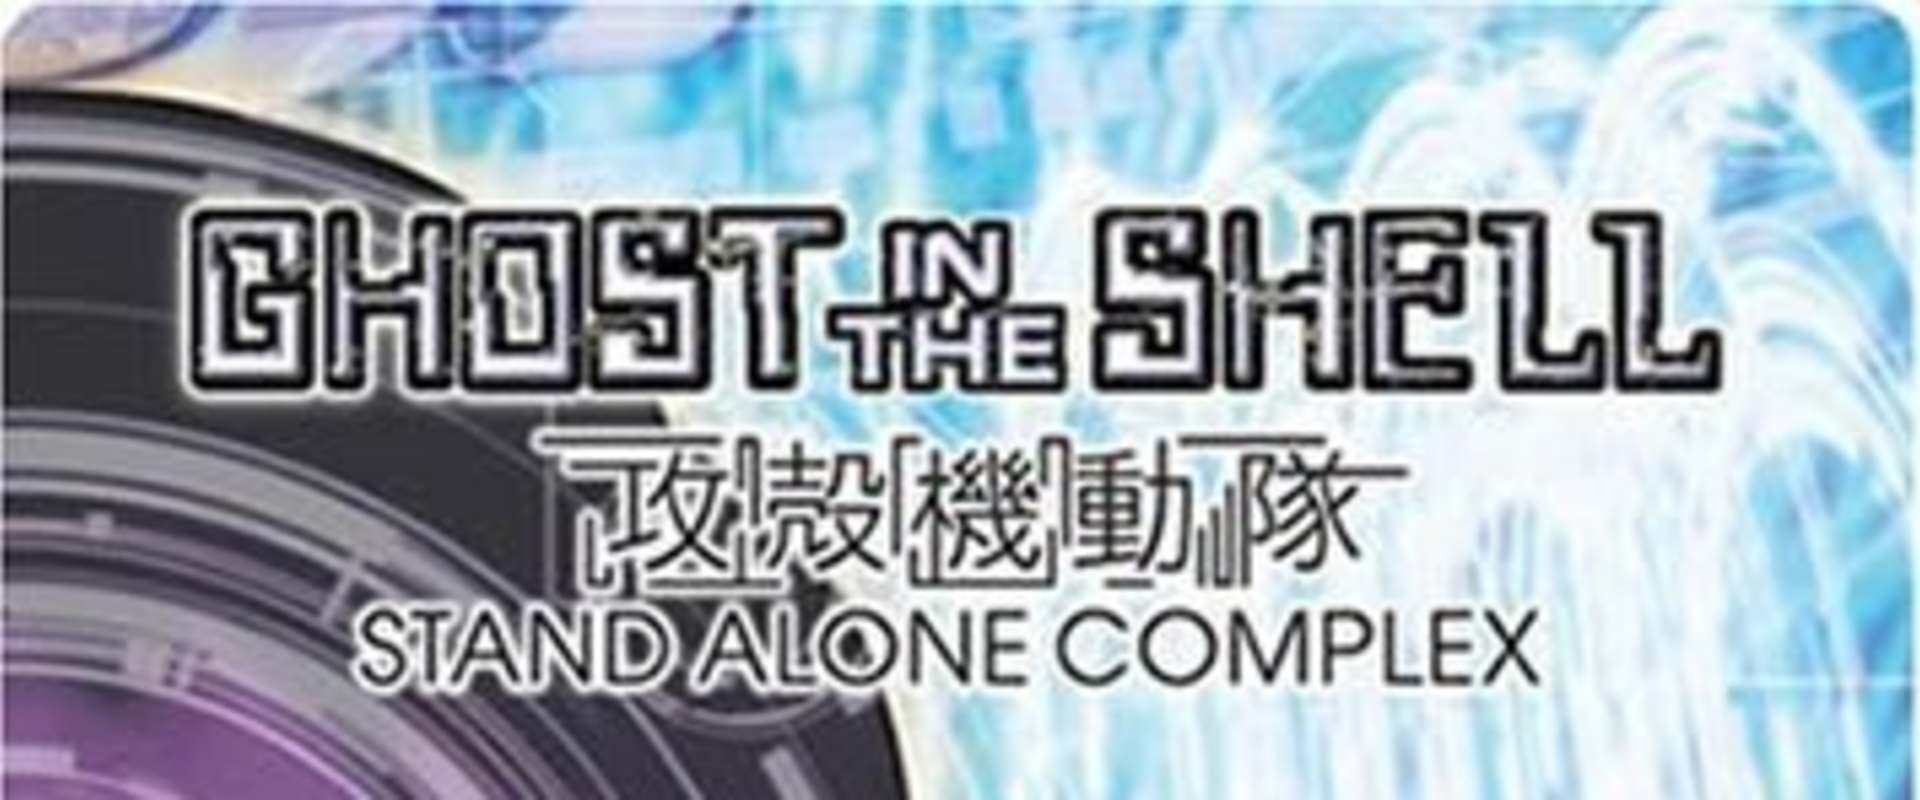 Ghost in the Shell: Stand Alone Complex - Solid State Society background 1